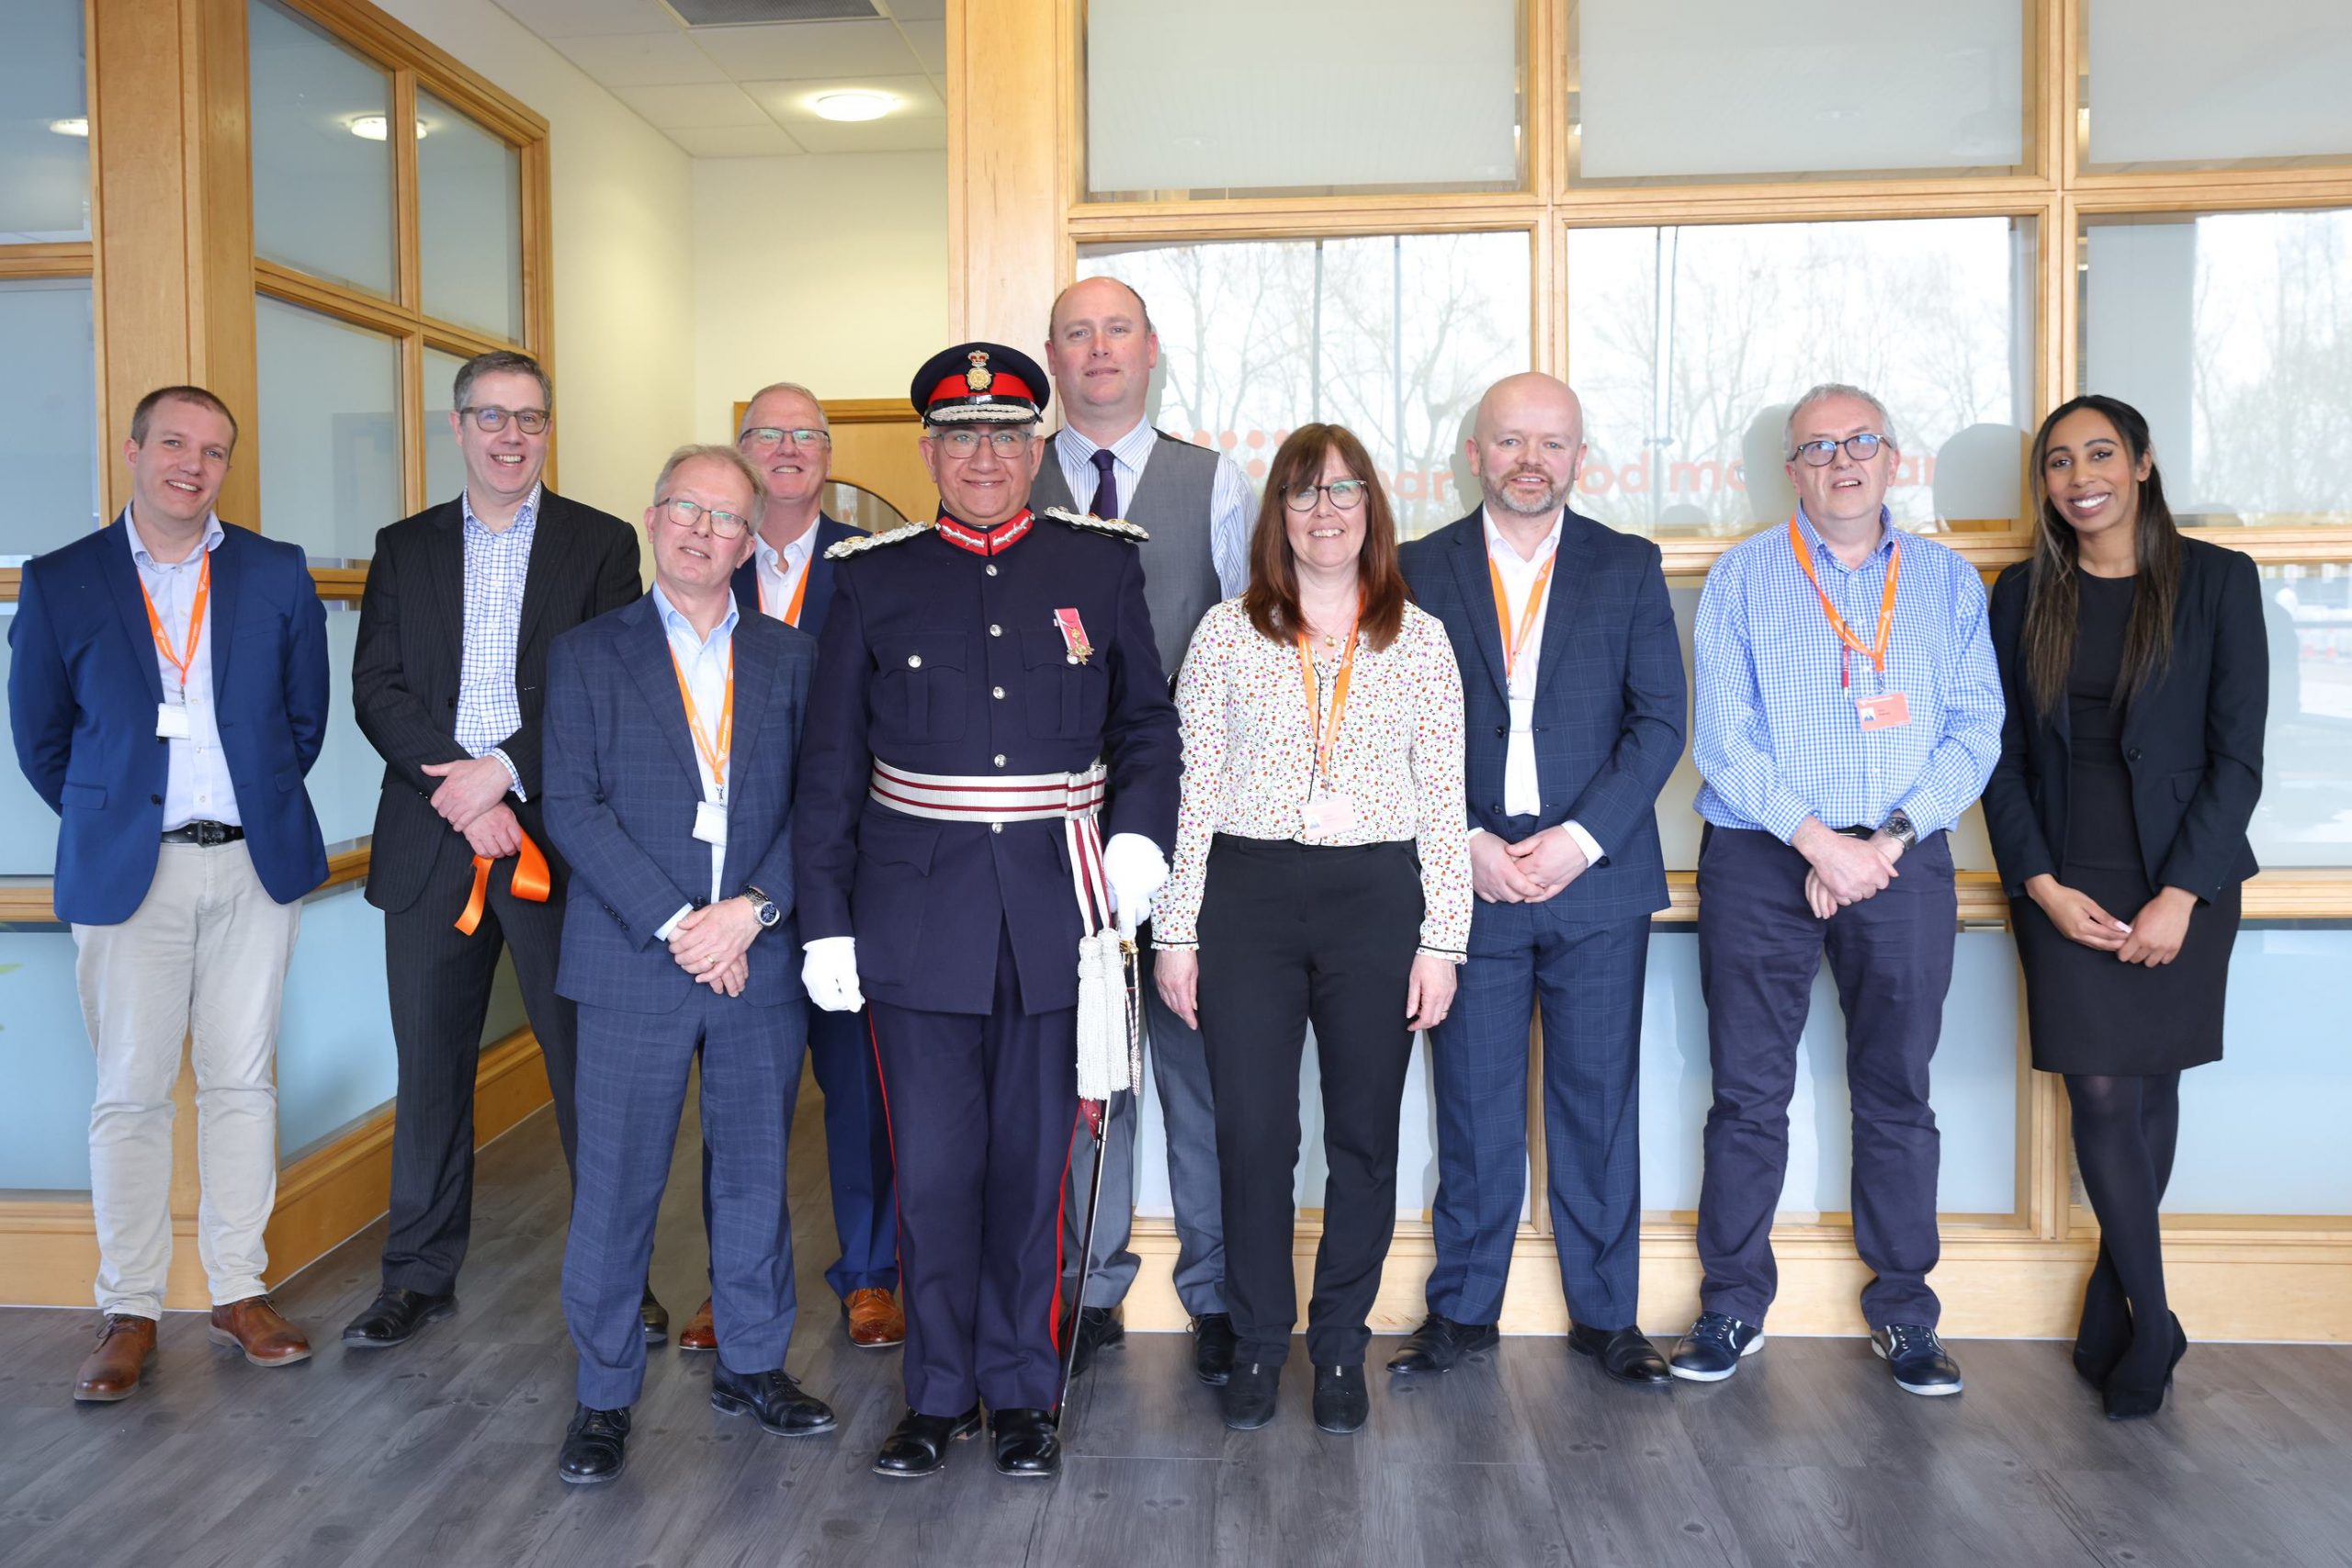 Lord-Lieutenant at official launch of Charnwood Molecular